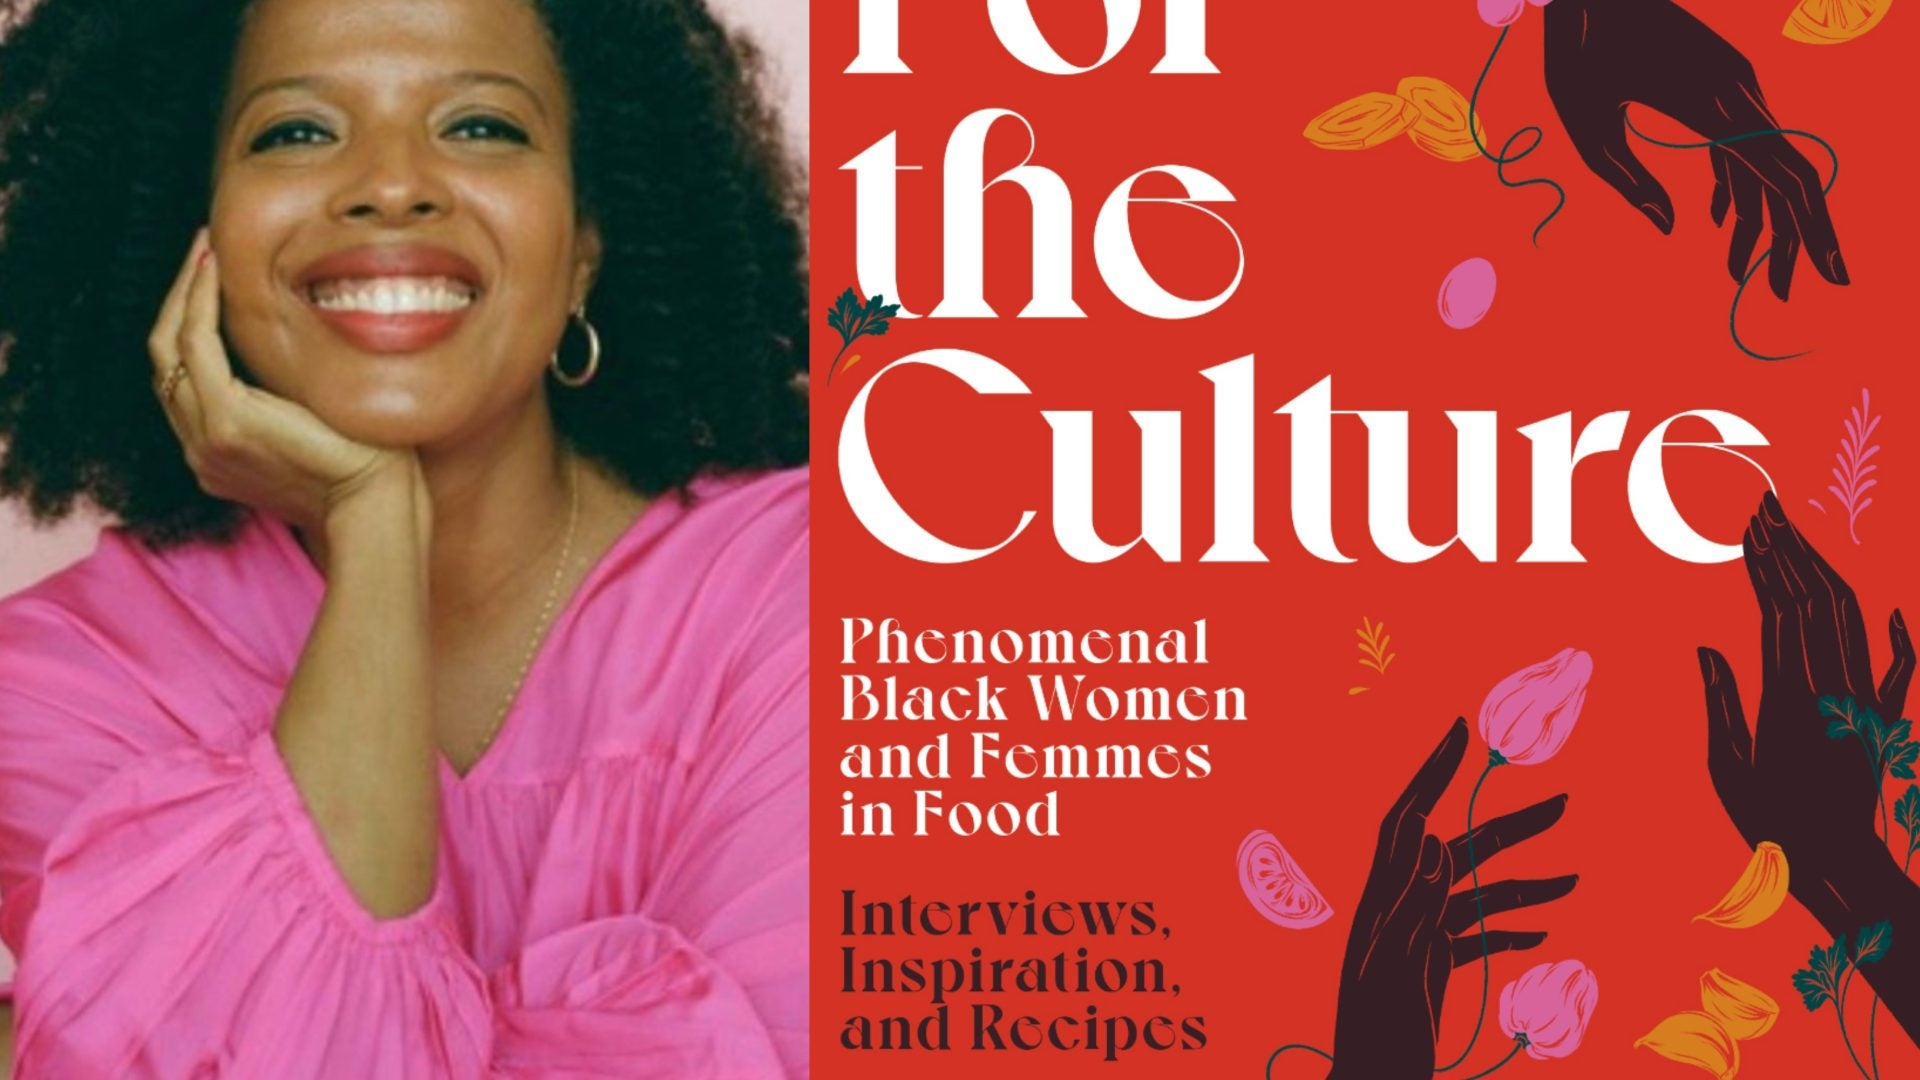 'For The Culture' Centers And Celebrates The Brilliance Of Black Women And Femmes In Food